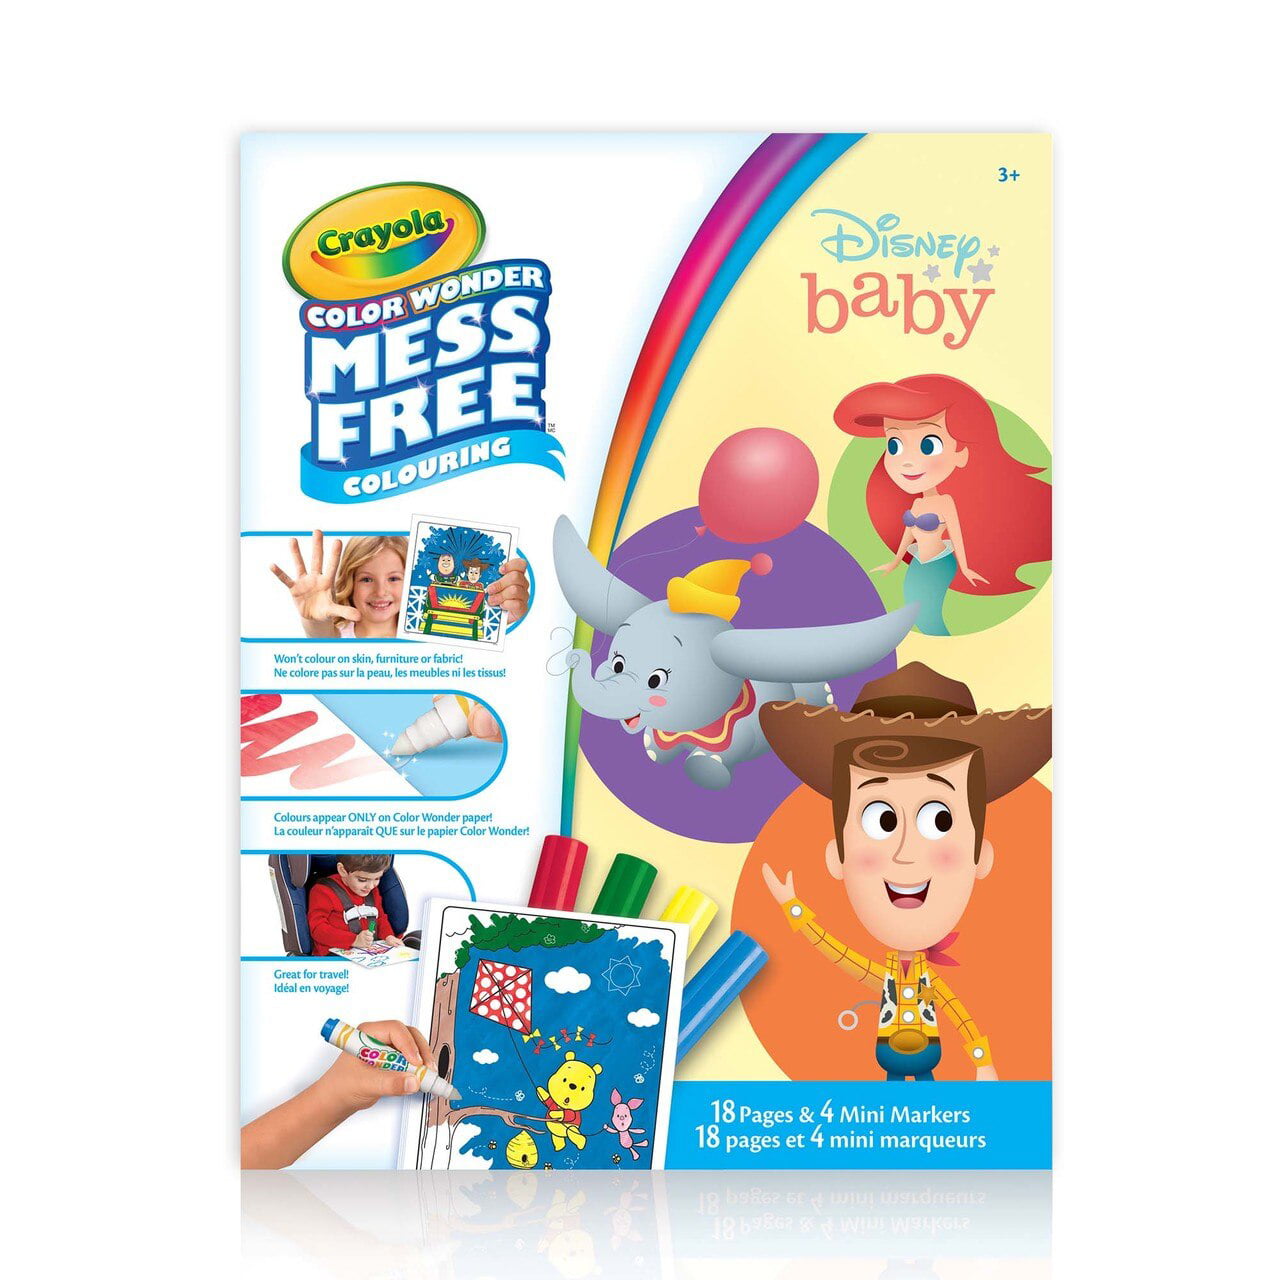 Crayola Color Wonder Mess Free Coloring Pad & Markers, Toy Story 4